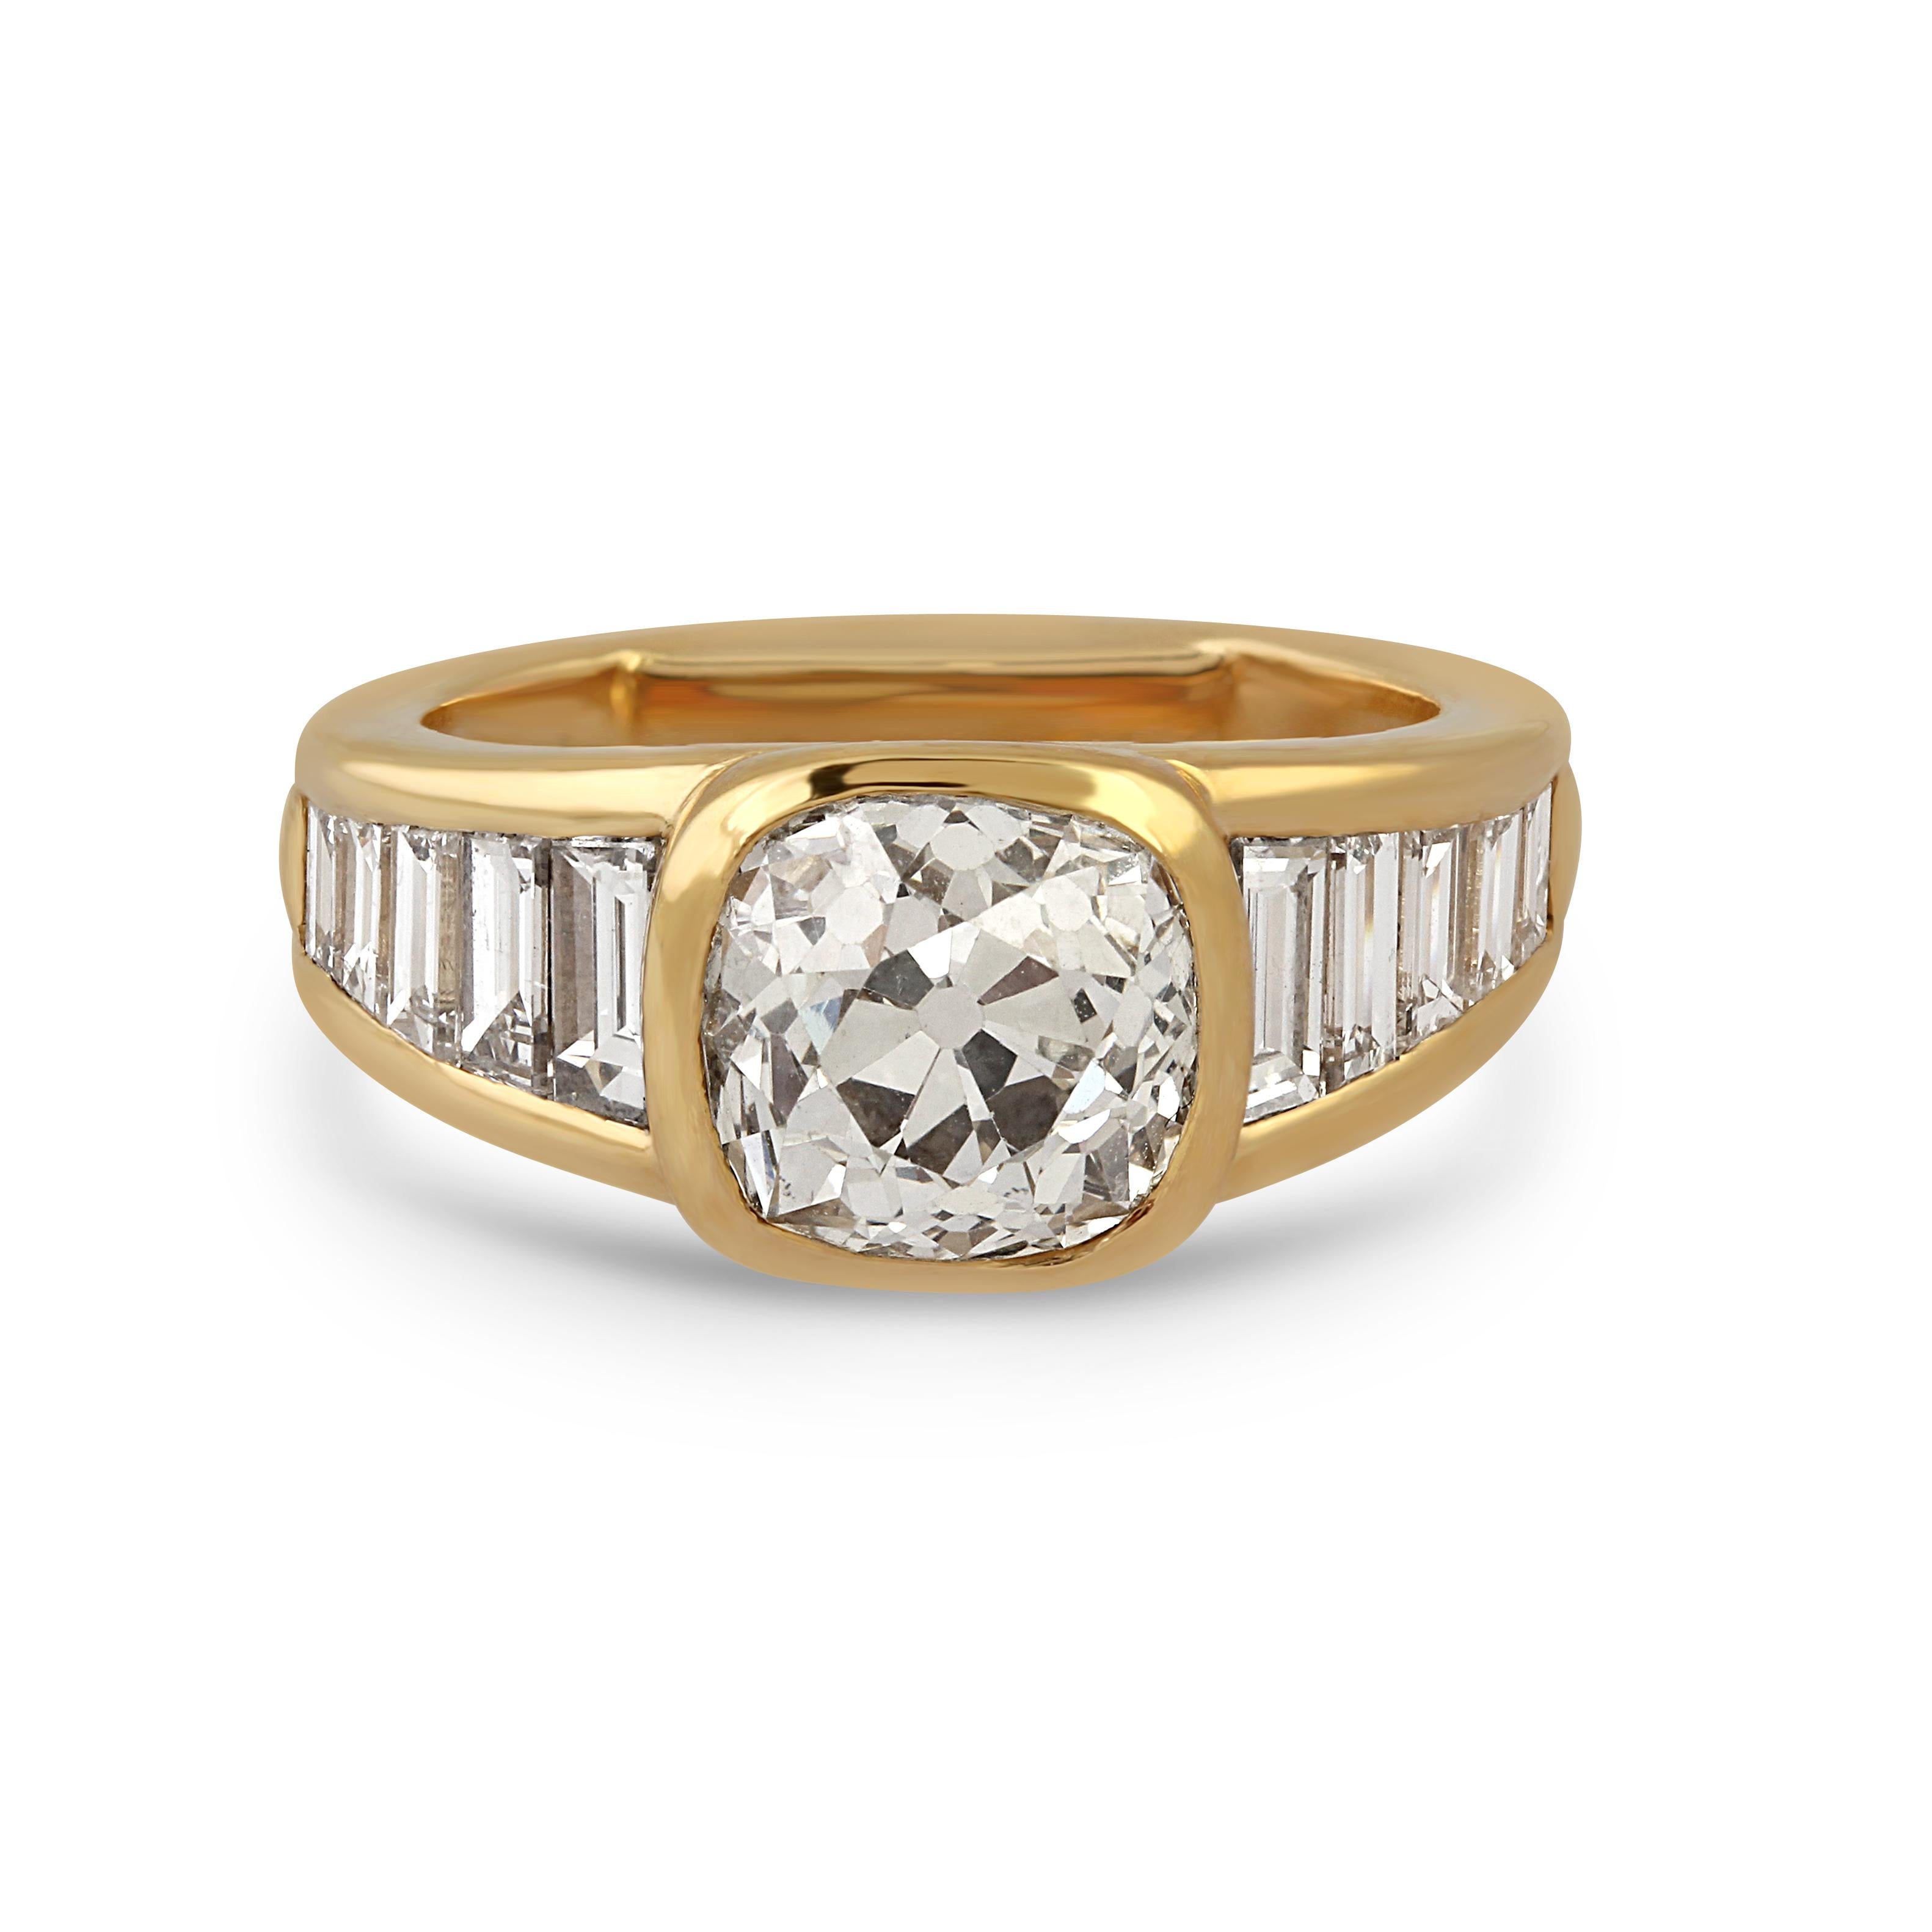 An 18k Gold & Diamond Ring by Mauboussin, set with a 3.05ct old cushion-cut diamond.

Size: M1/2
Weight: 10.28gr
